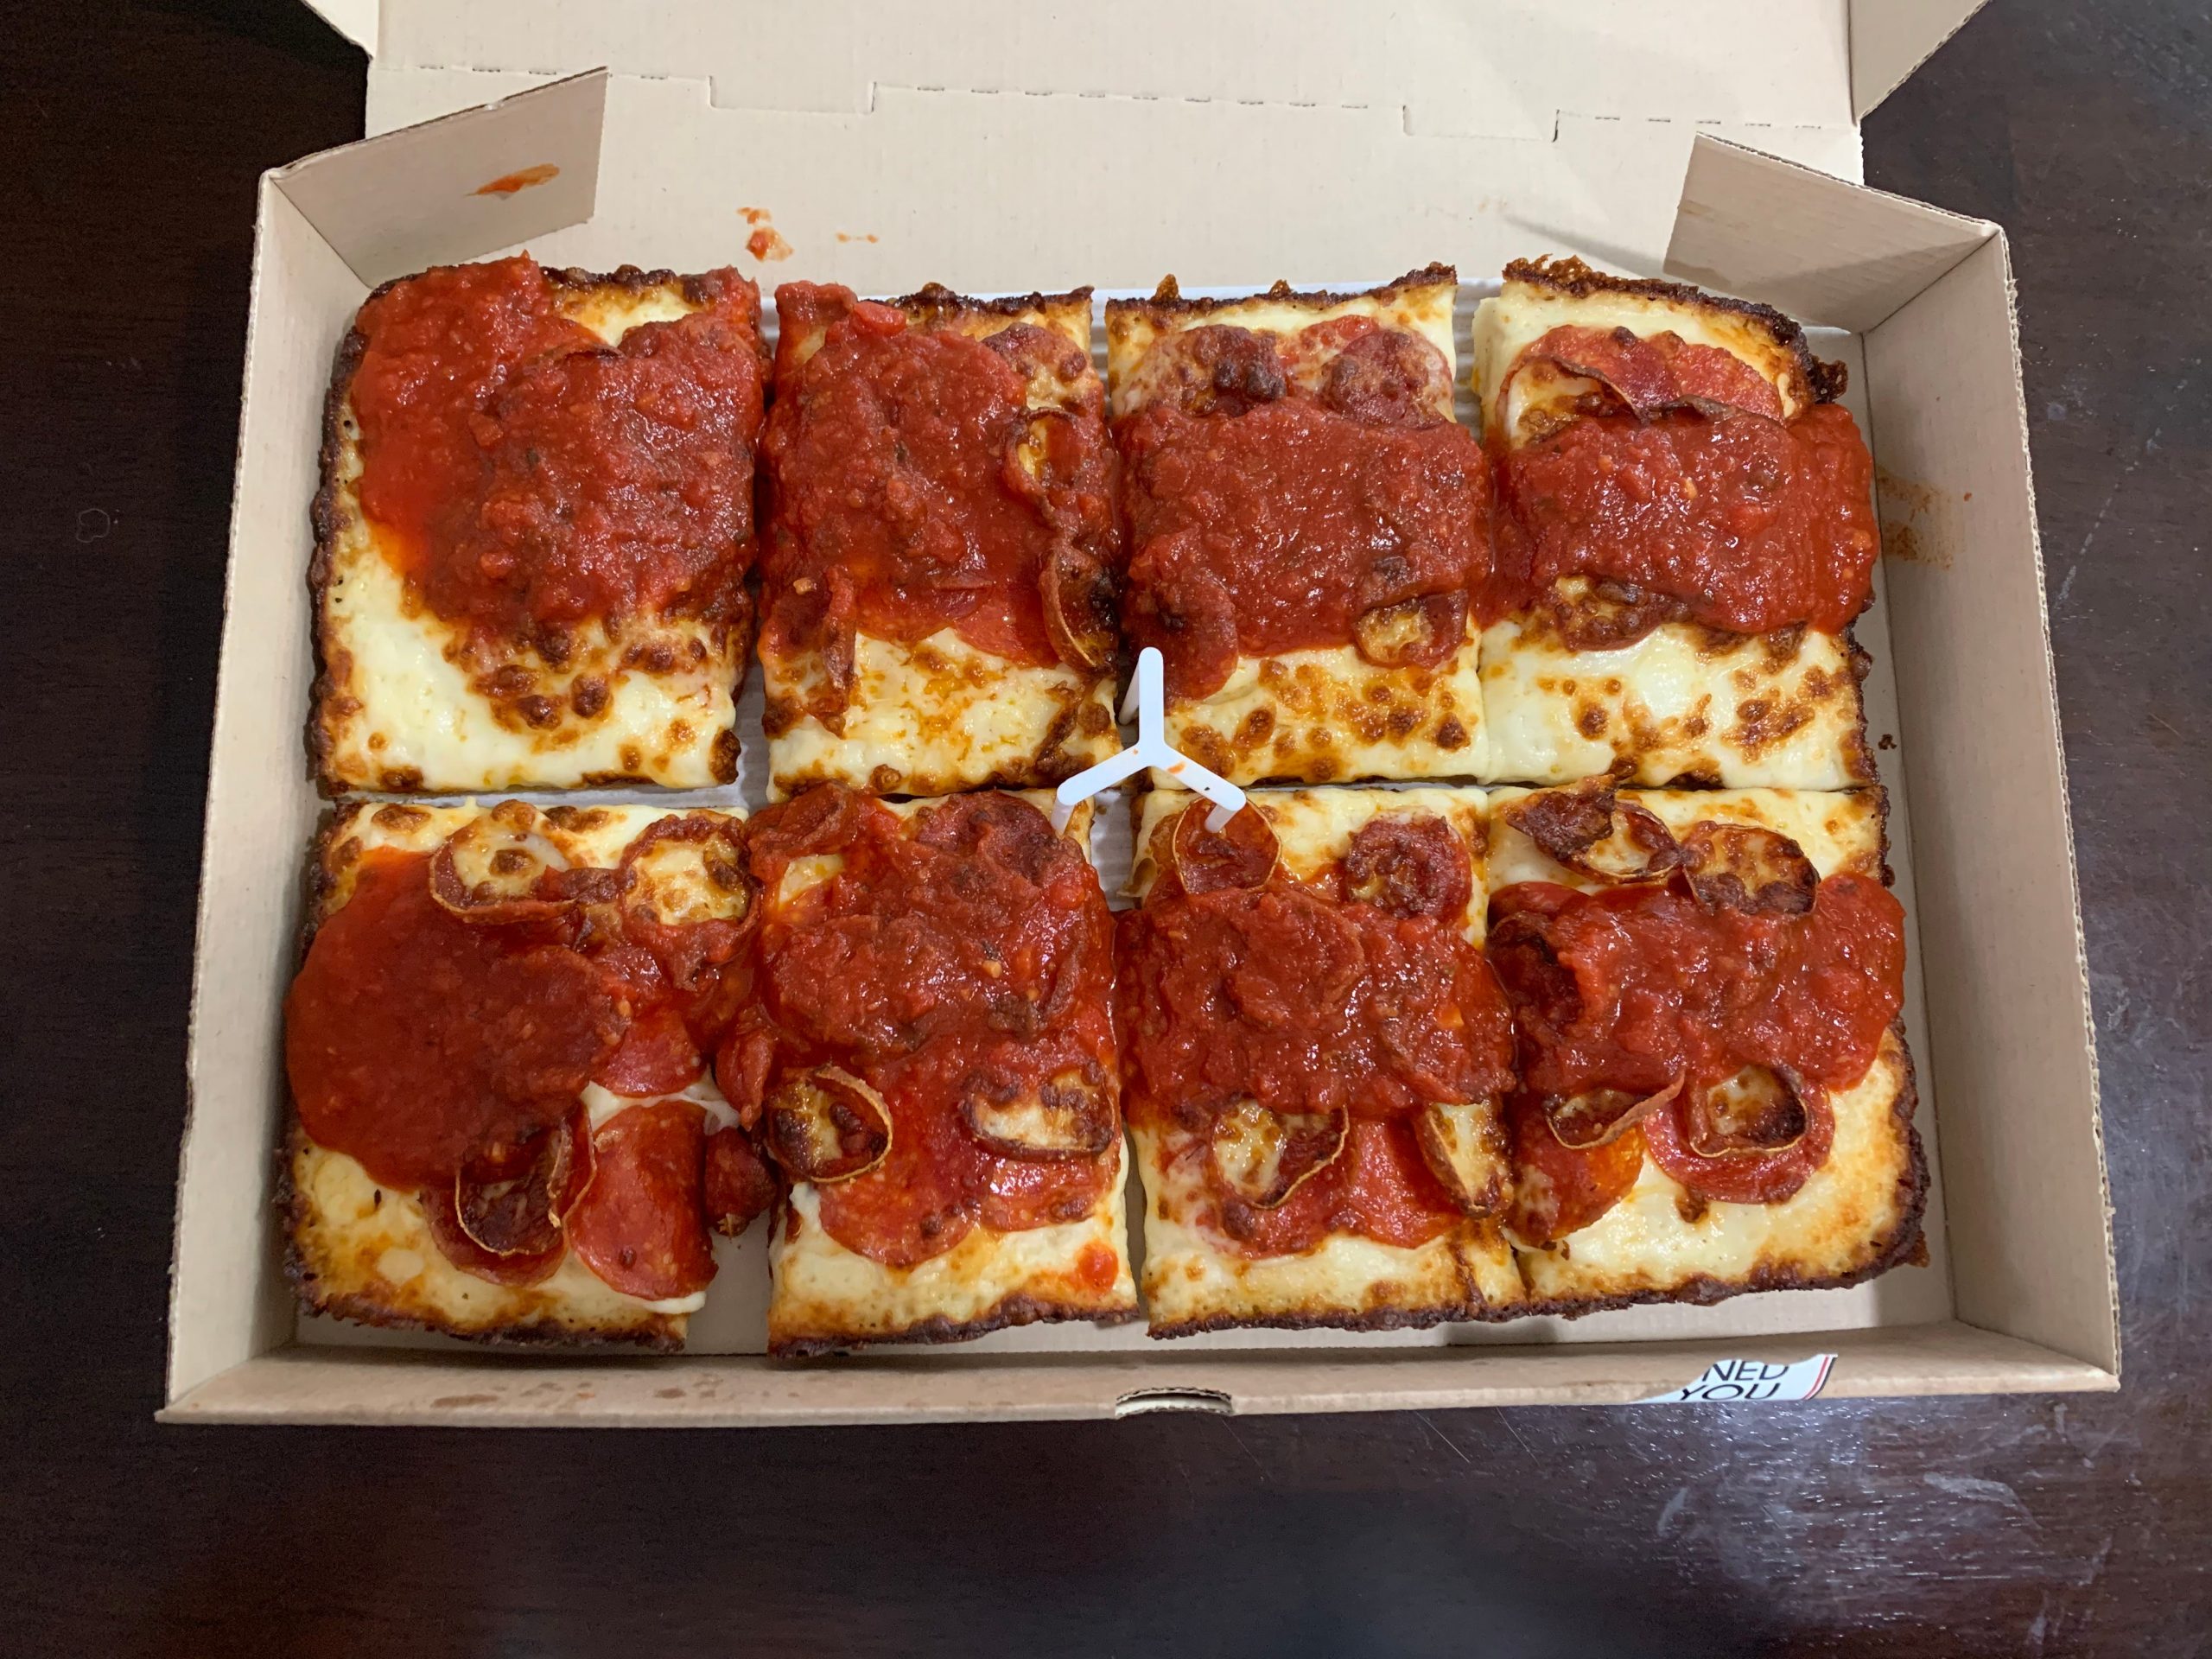 Pizza Hut just introduced DetroitStyle pizza here's what it looks like